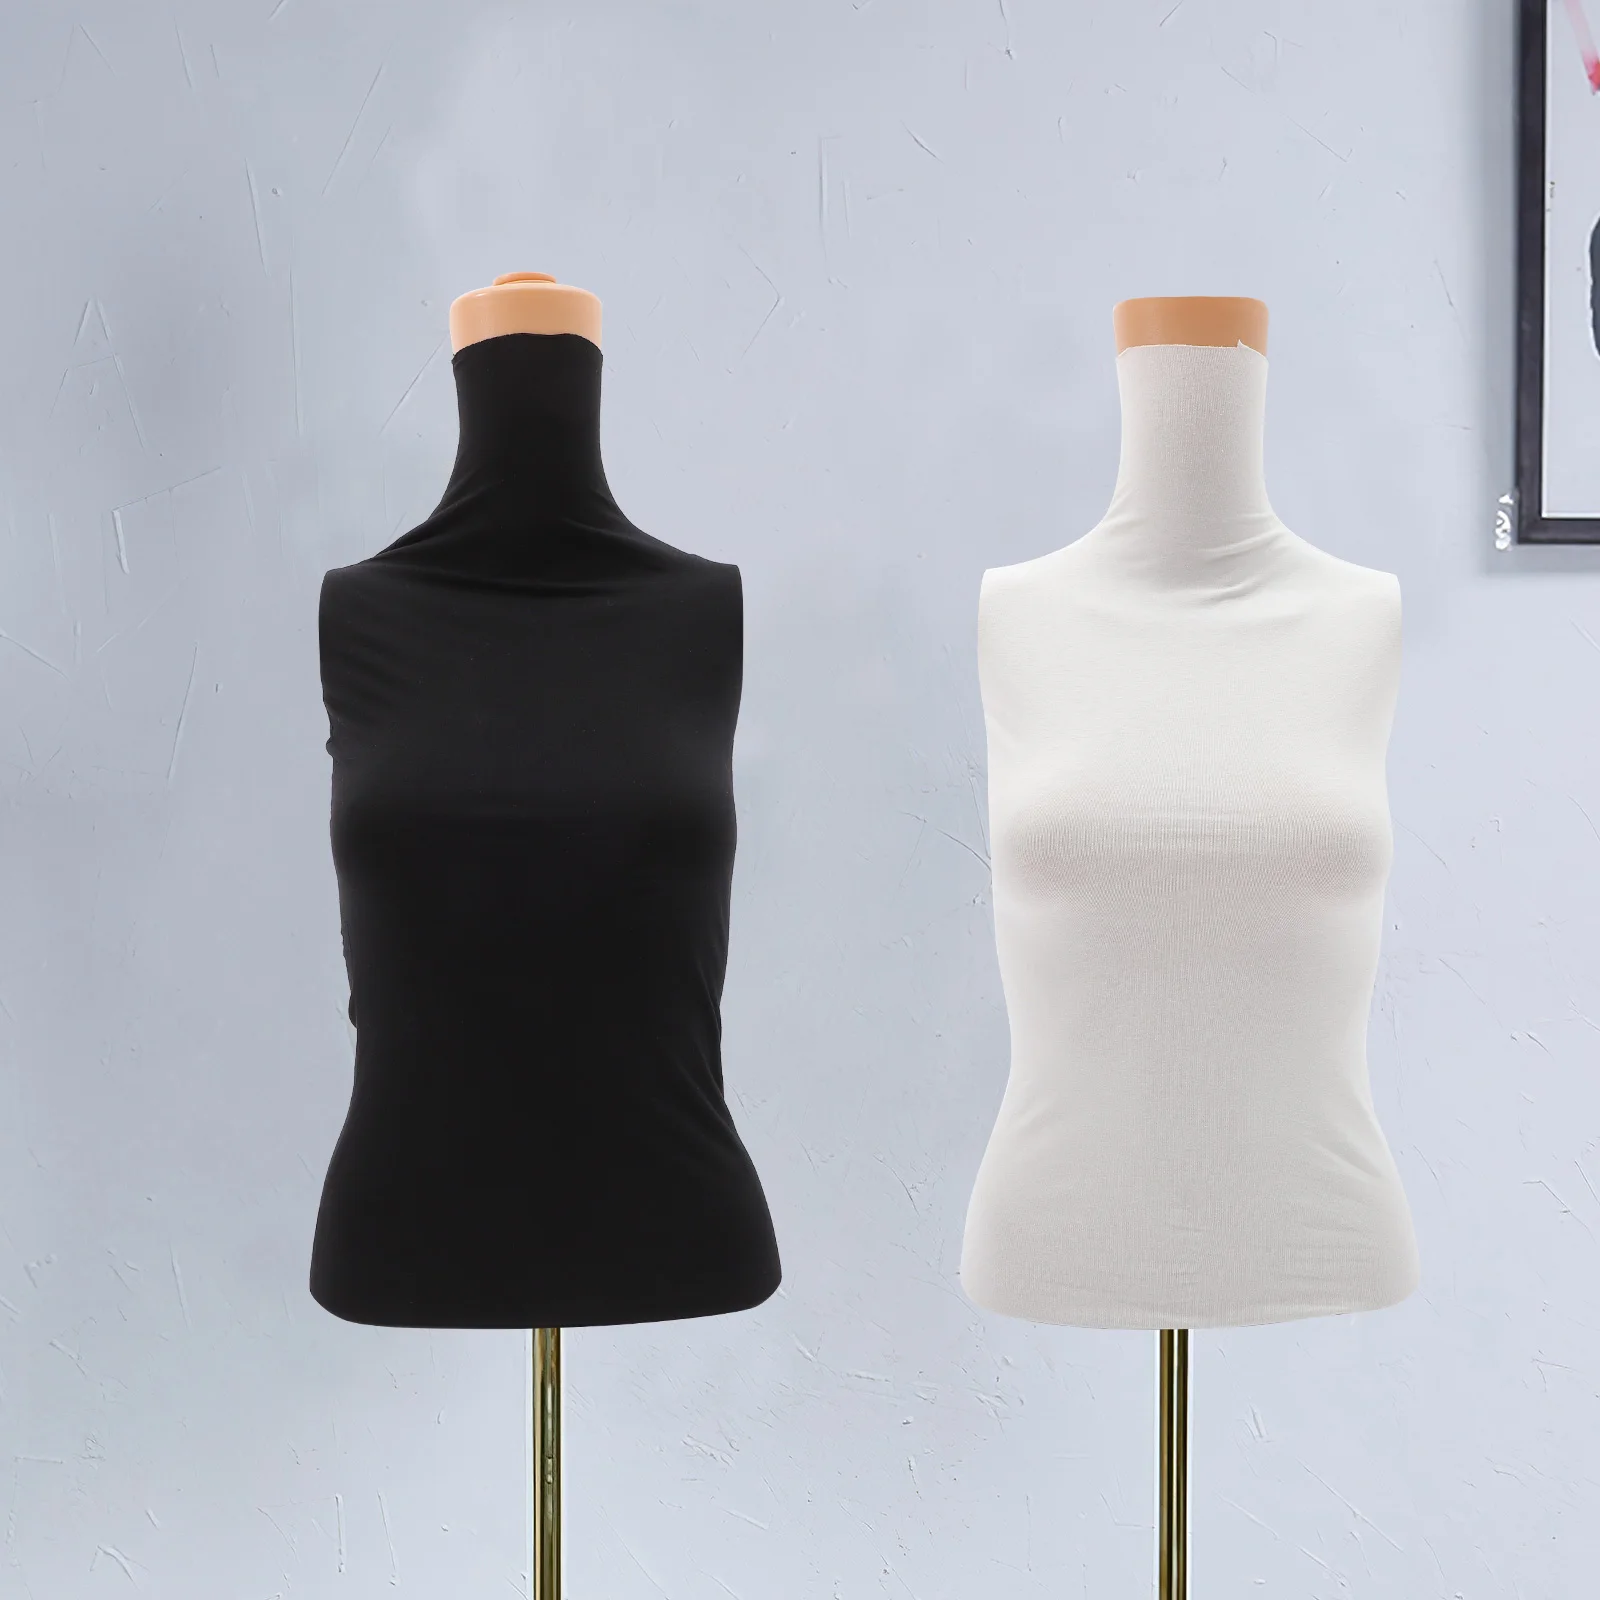 2Pcs Mannequin Fabric Cover Female Torso Body Cover Upper Body Protector Mannequin Supplies for for Mannequin Body ( Black images - 6